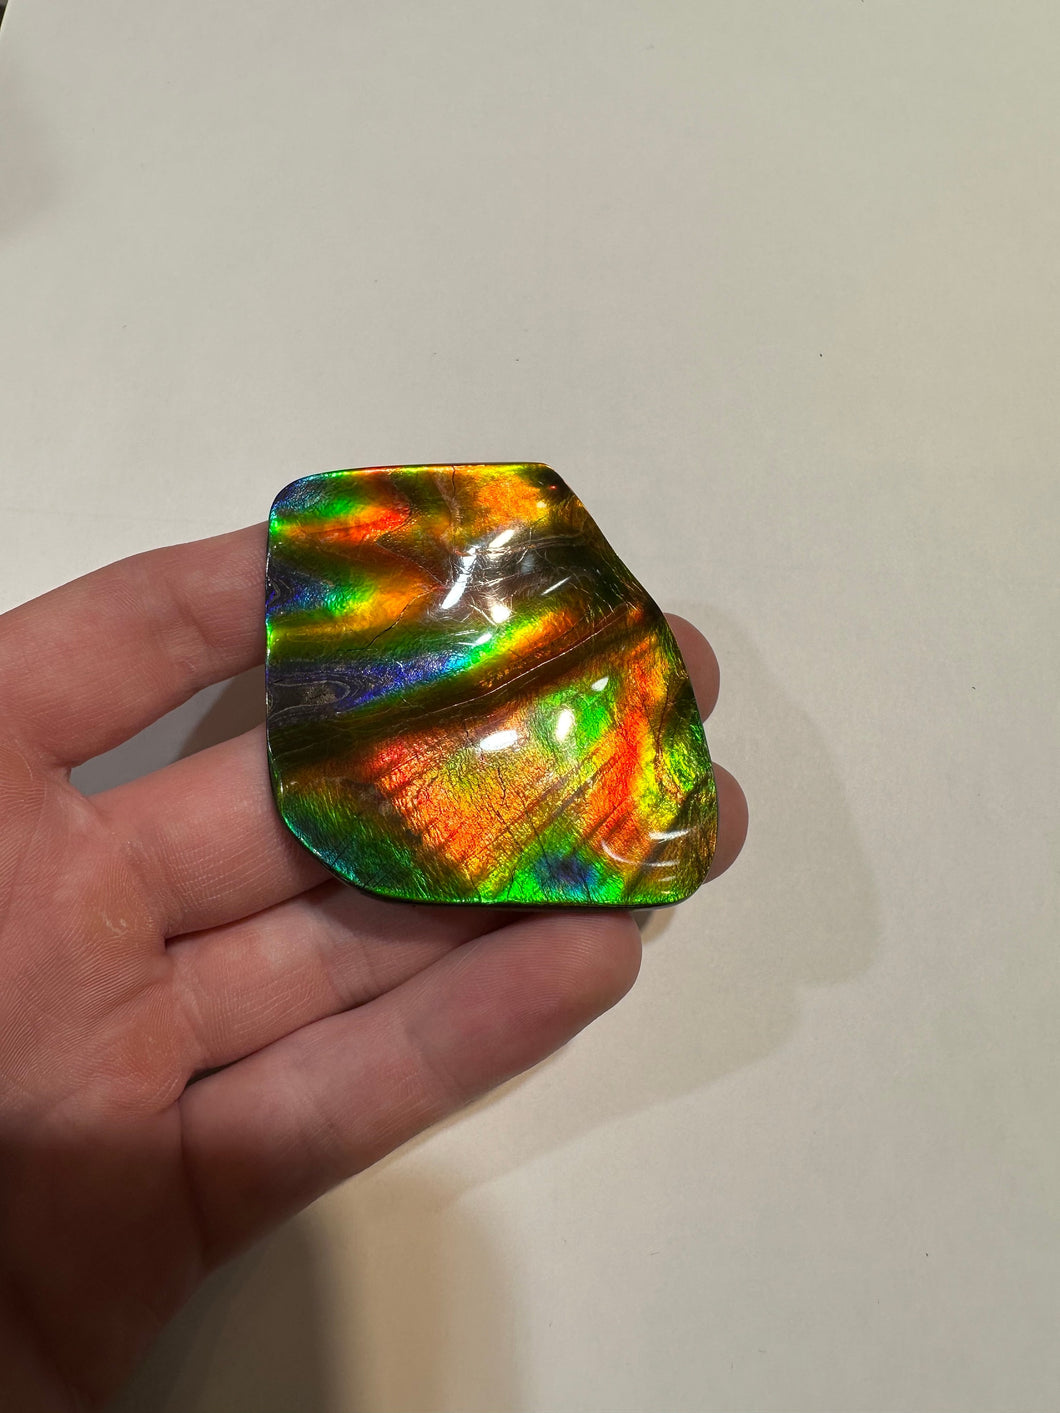 Beautiful Hand Polished Ammolite with Multiple Vibrant Colours